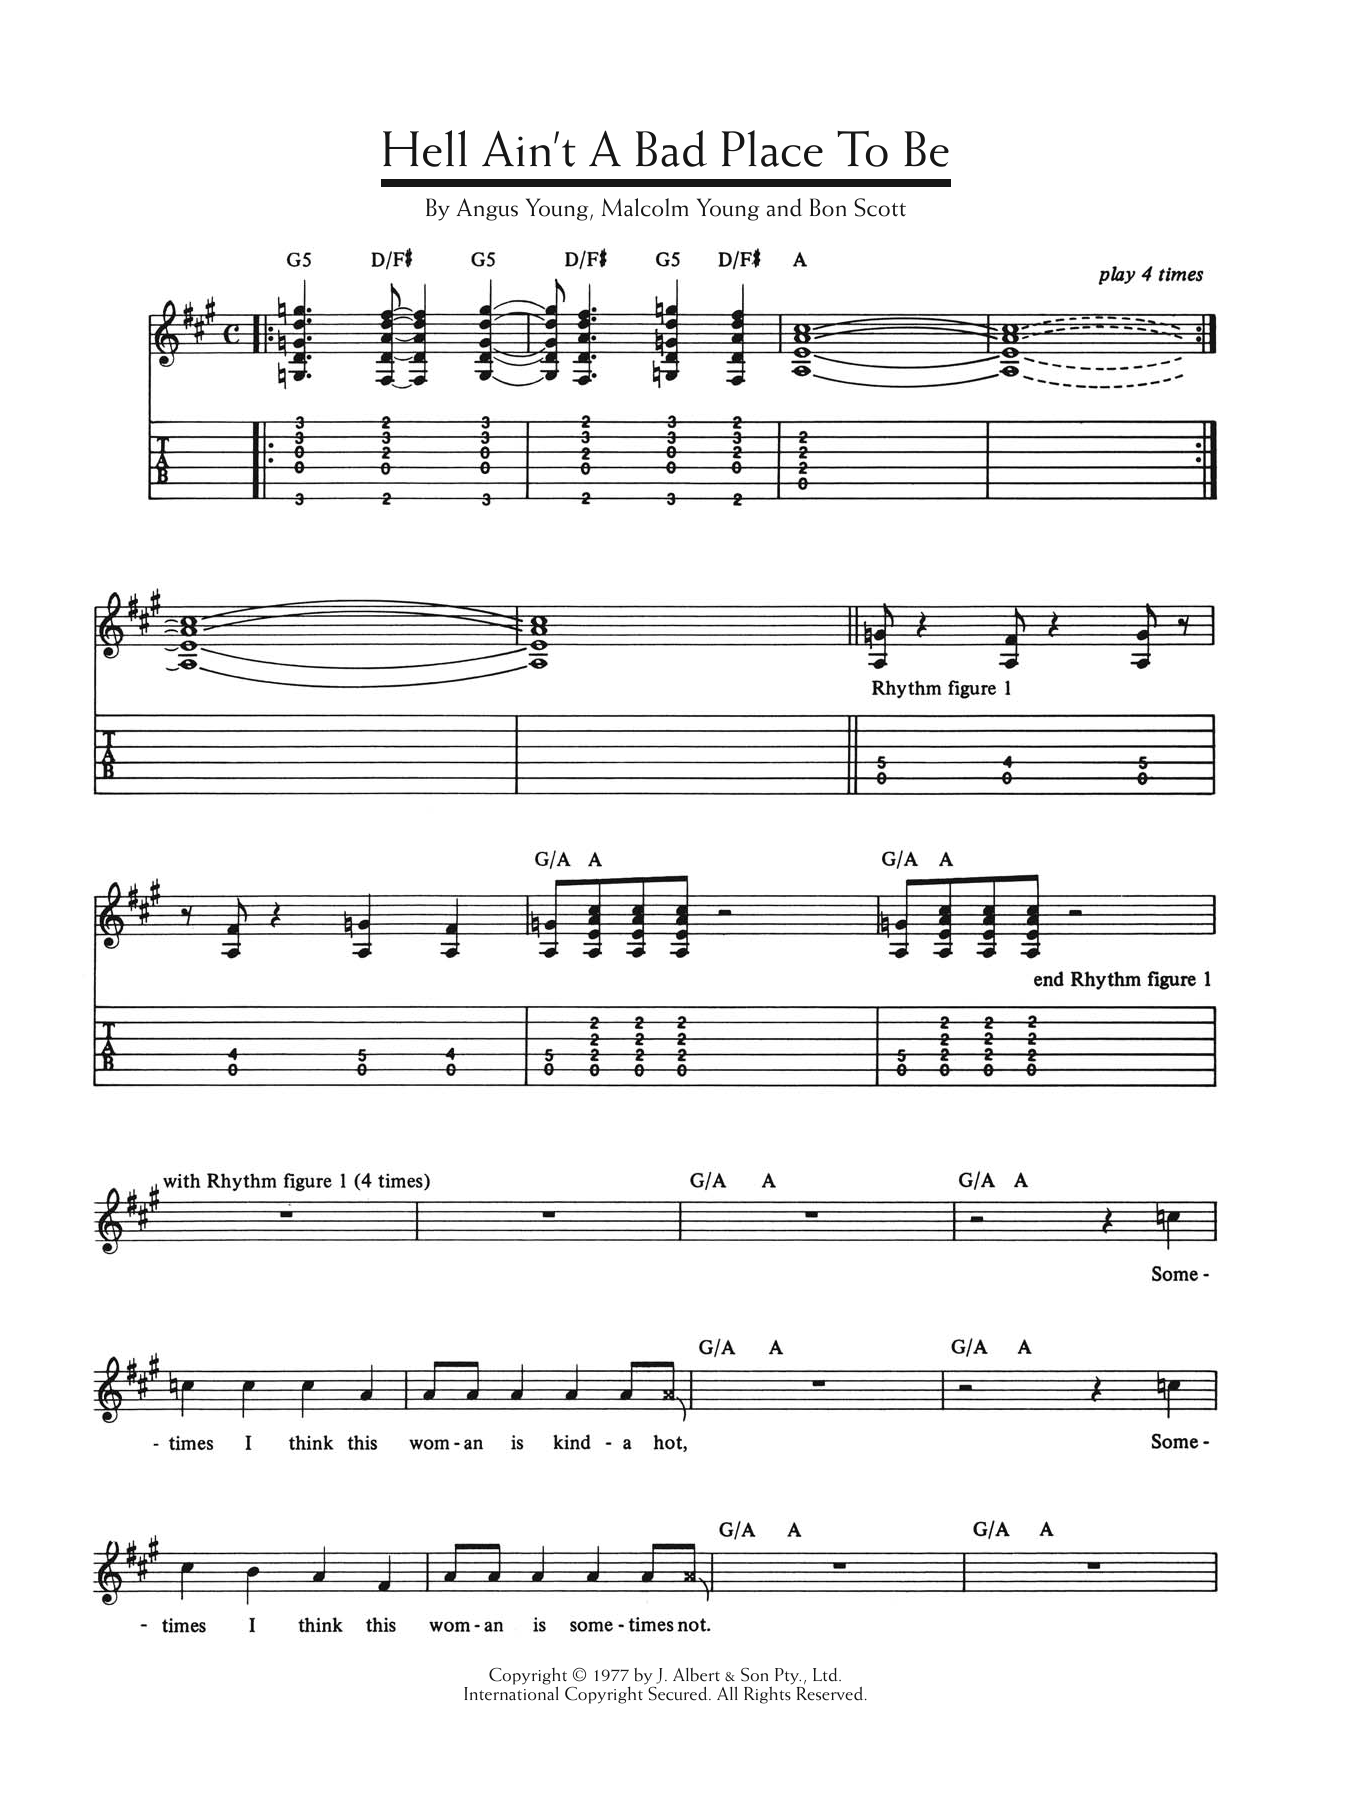 Download AC/DC Hell Ain't A Bad Place To Be Sheet Music